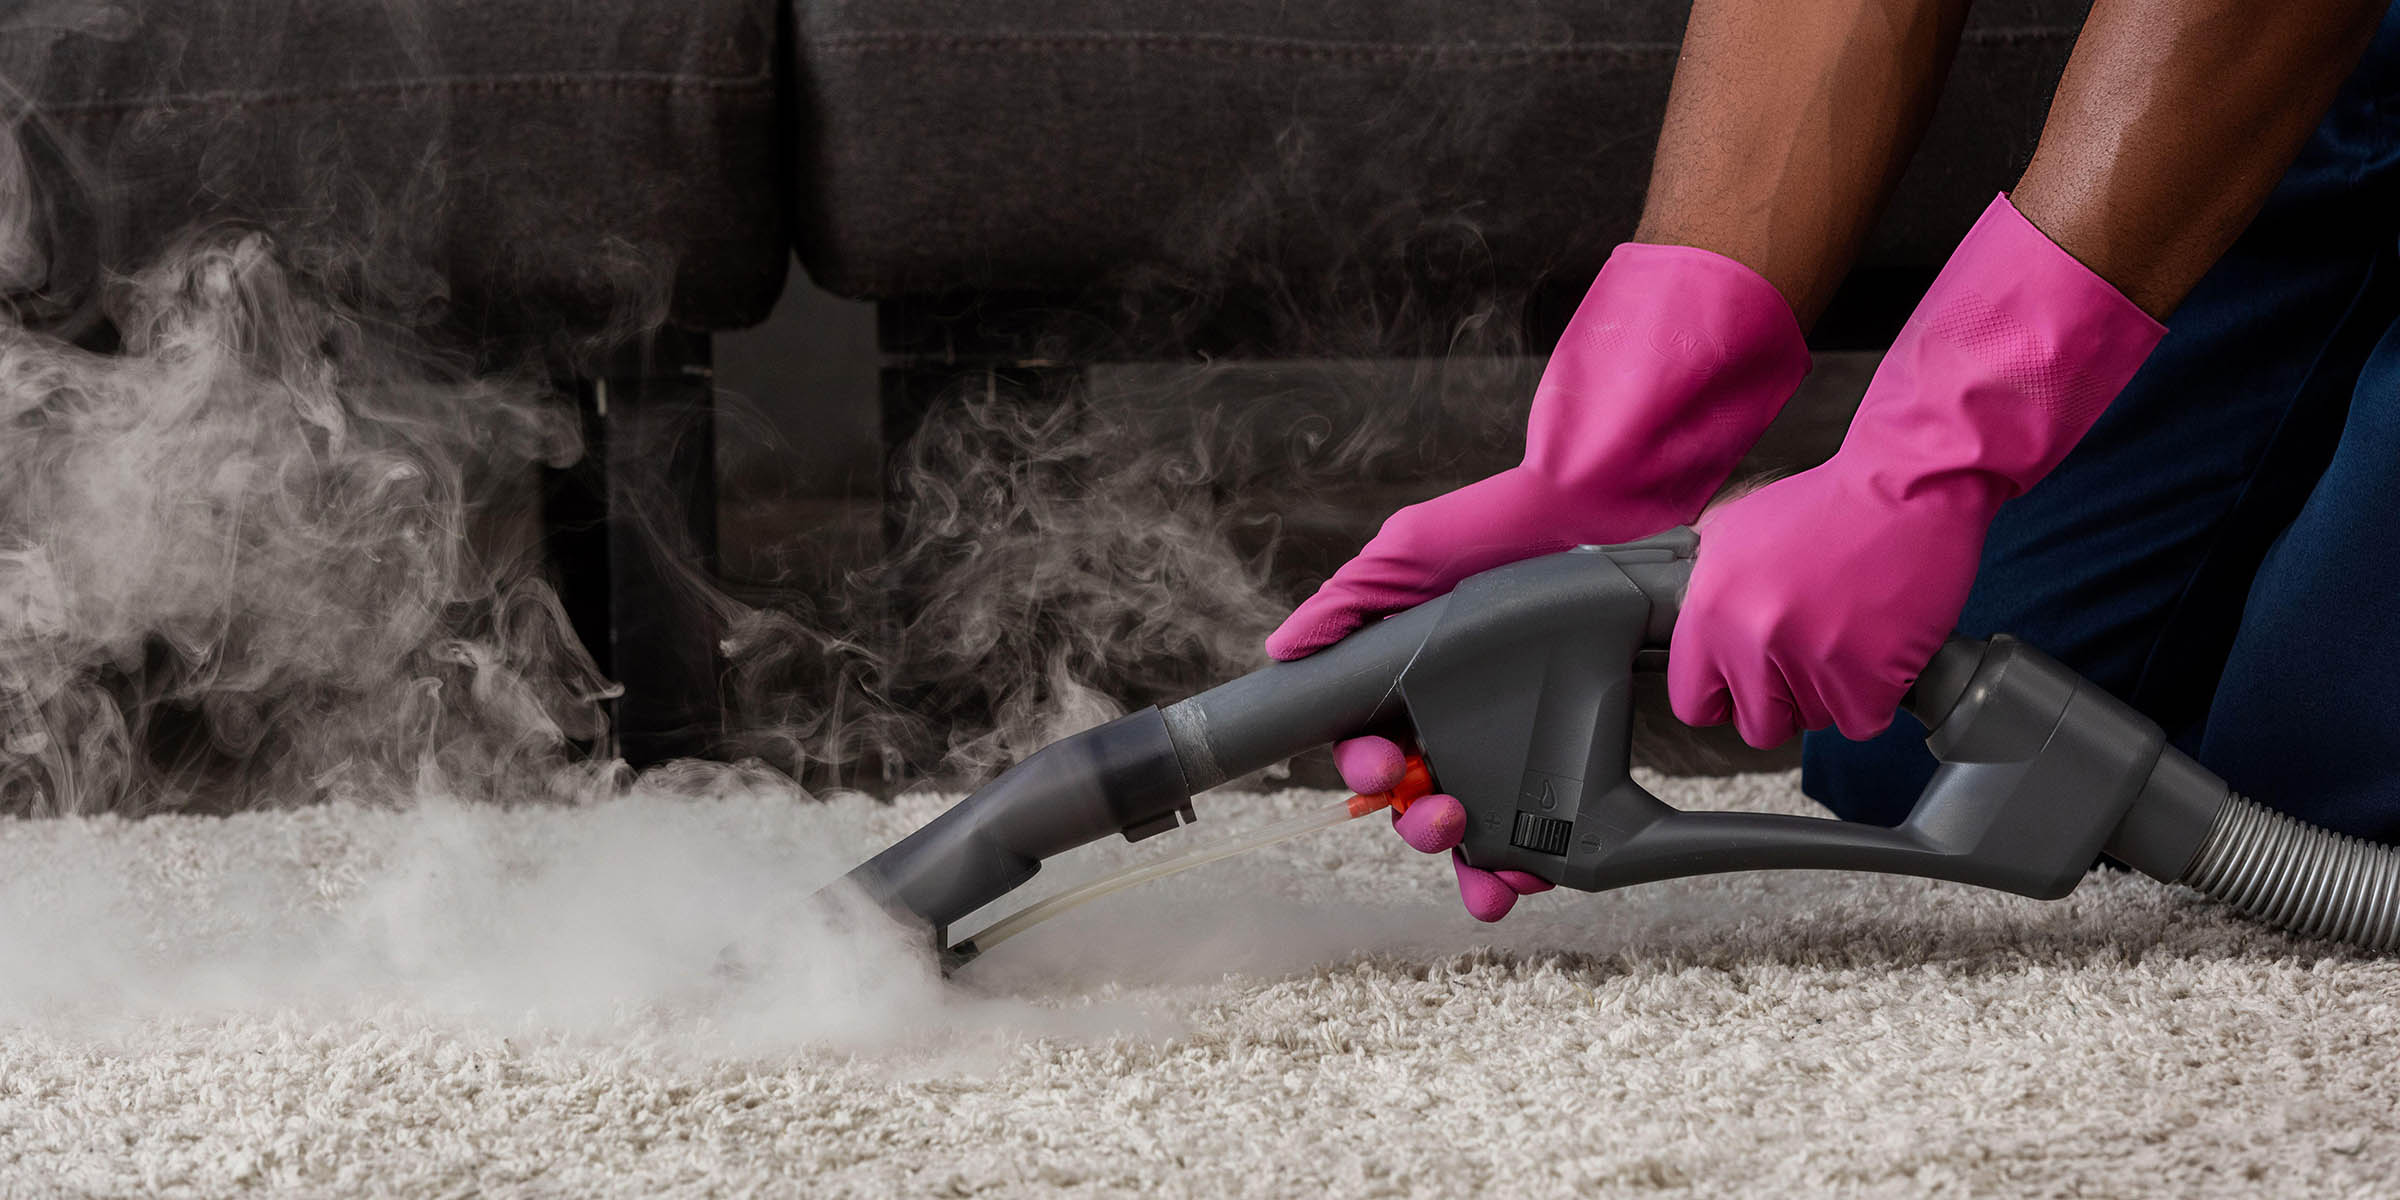 steam cleaning upholstery
